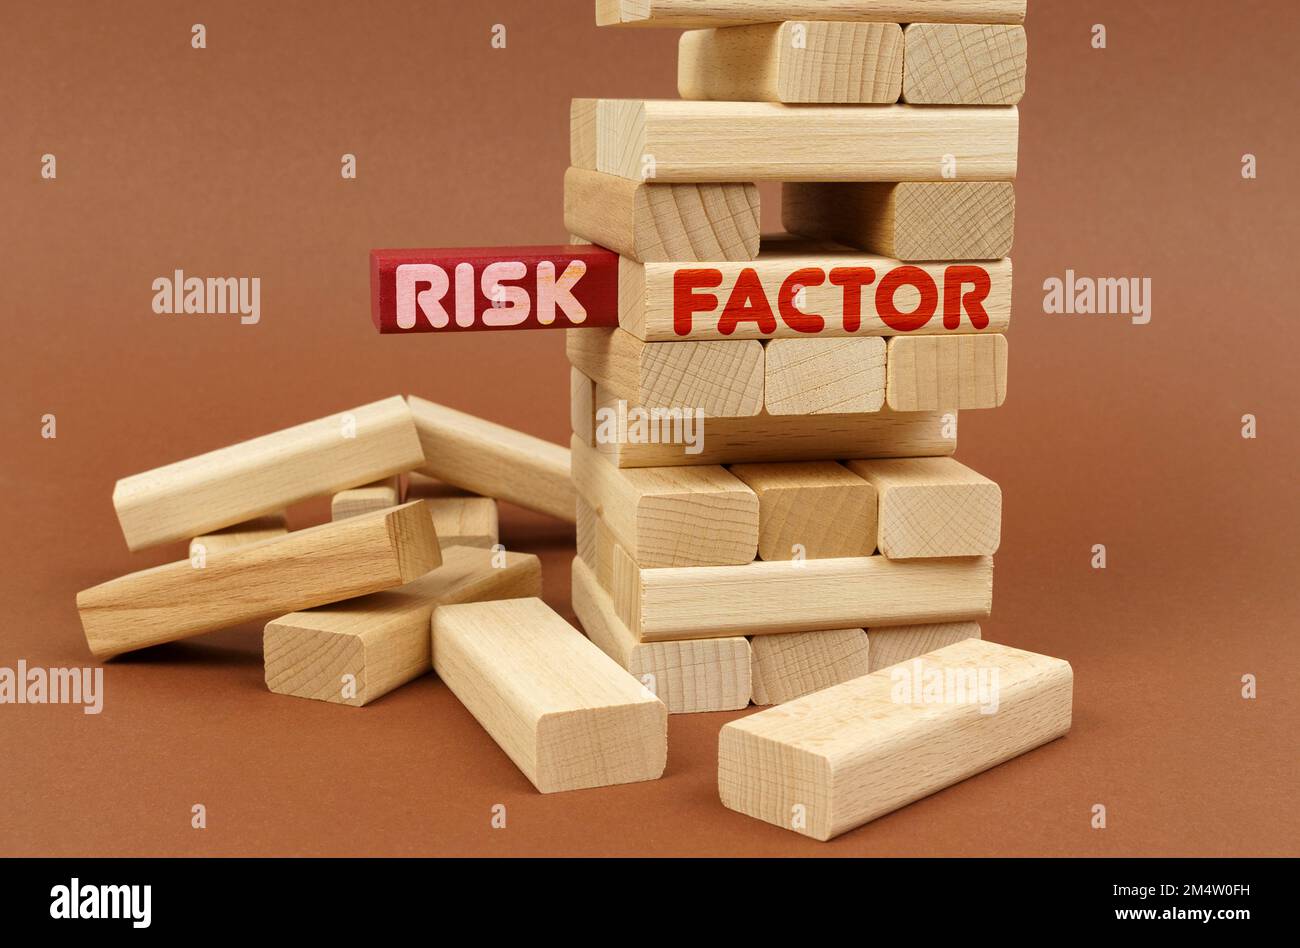 Medical concept. There is a wooden tower on a brown surface. On the red block there is an inscription - Risk, on the next block - FACTOR Stock Photo